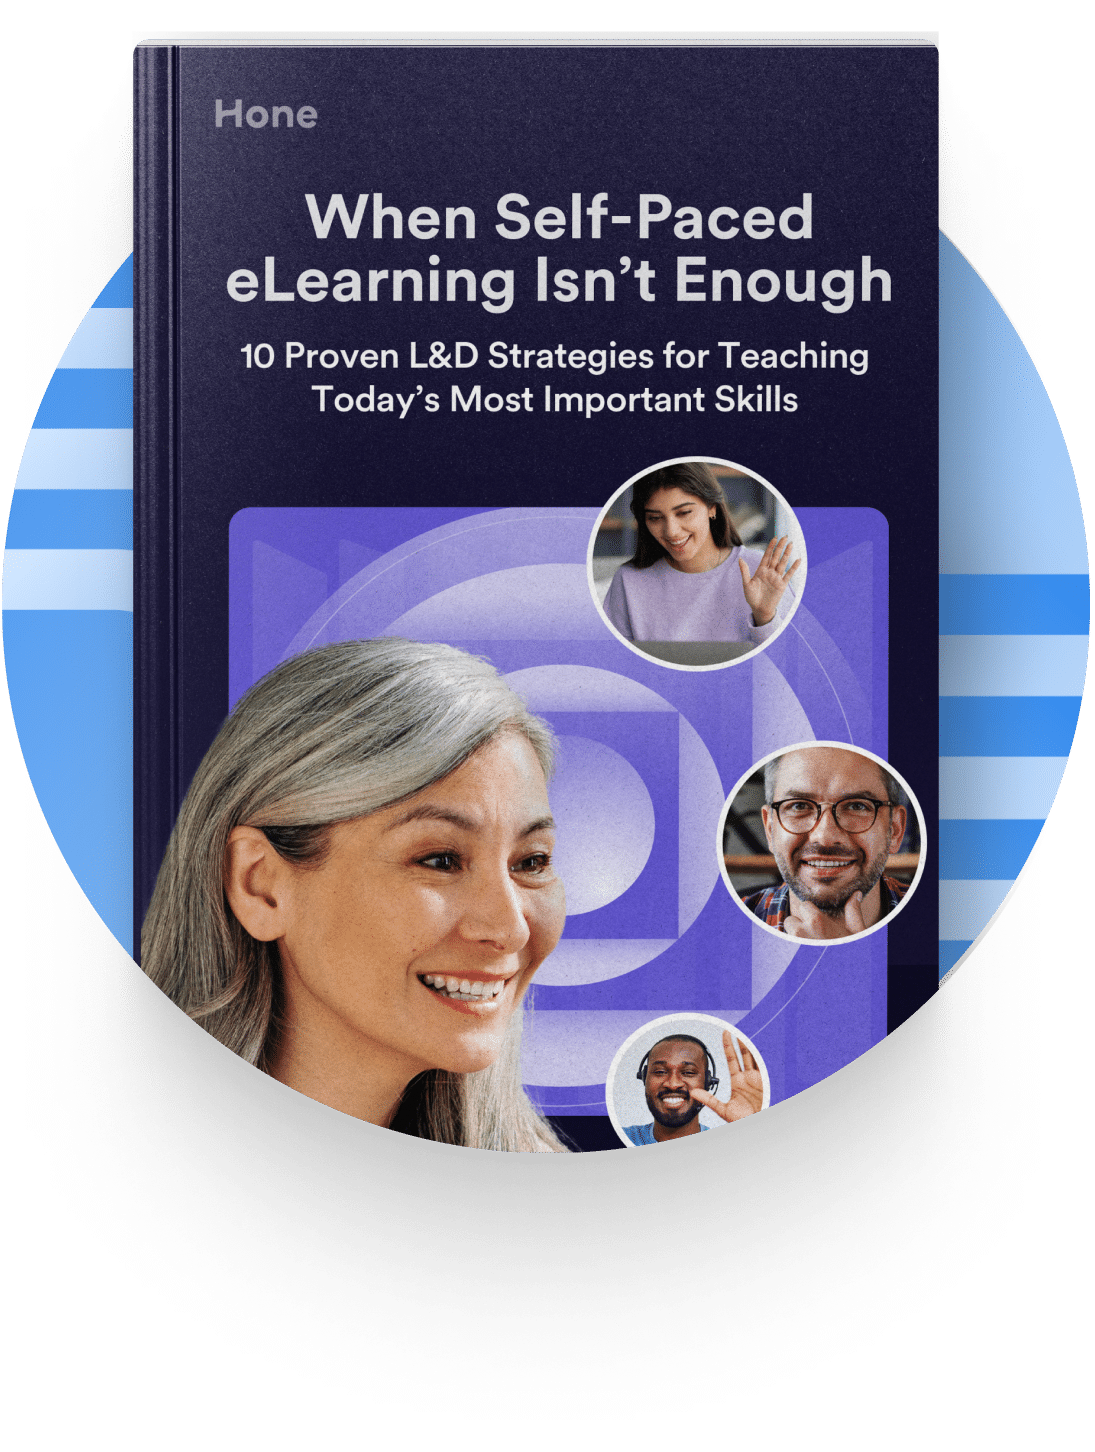 Ebook Title: When Self-paced eLearning Isn't Enough